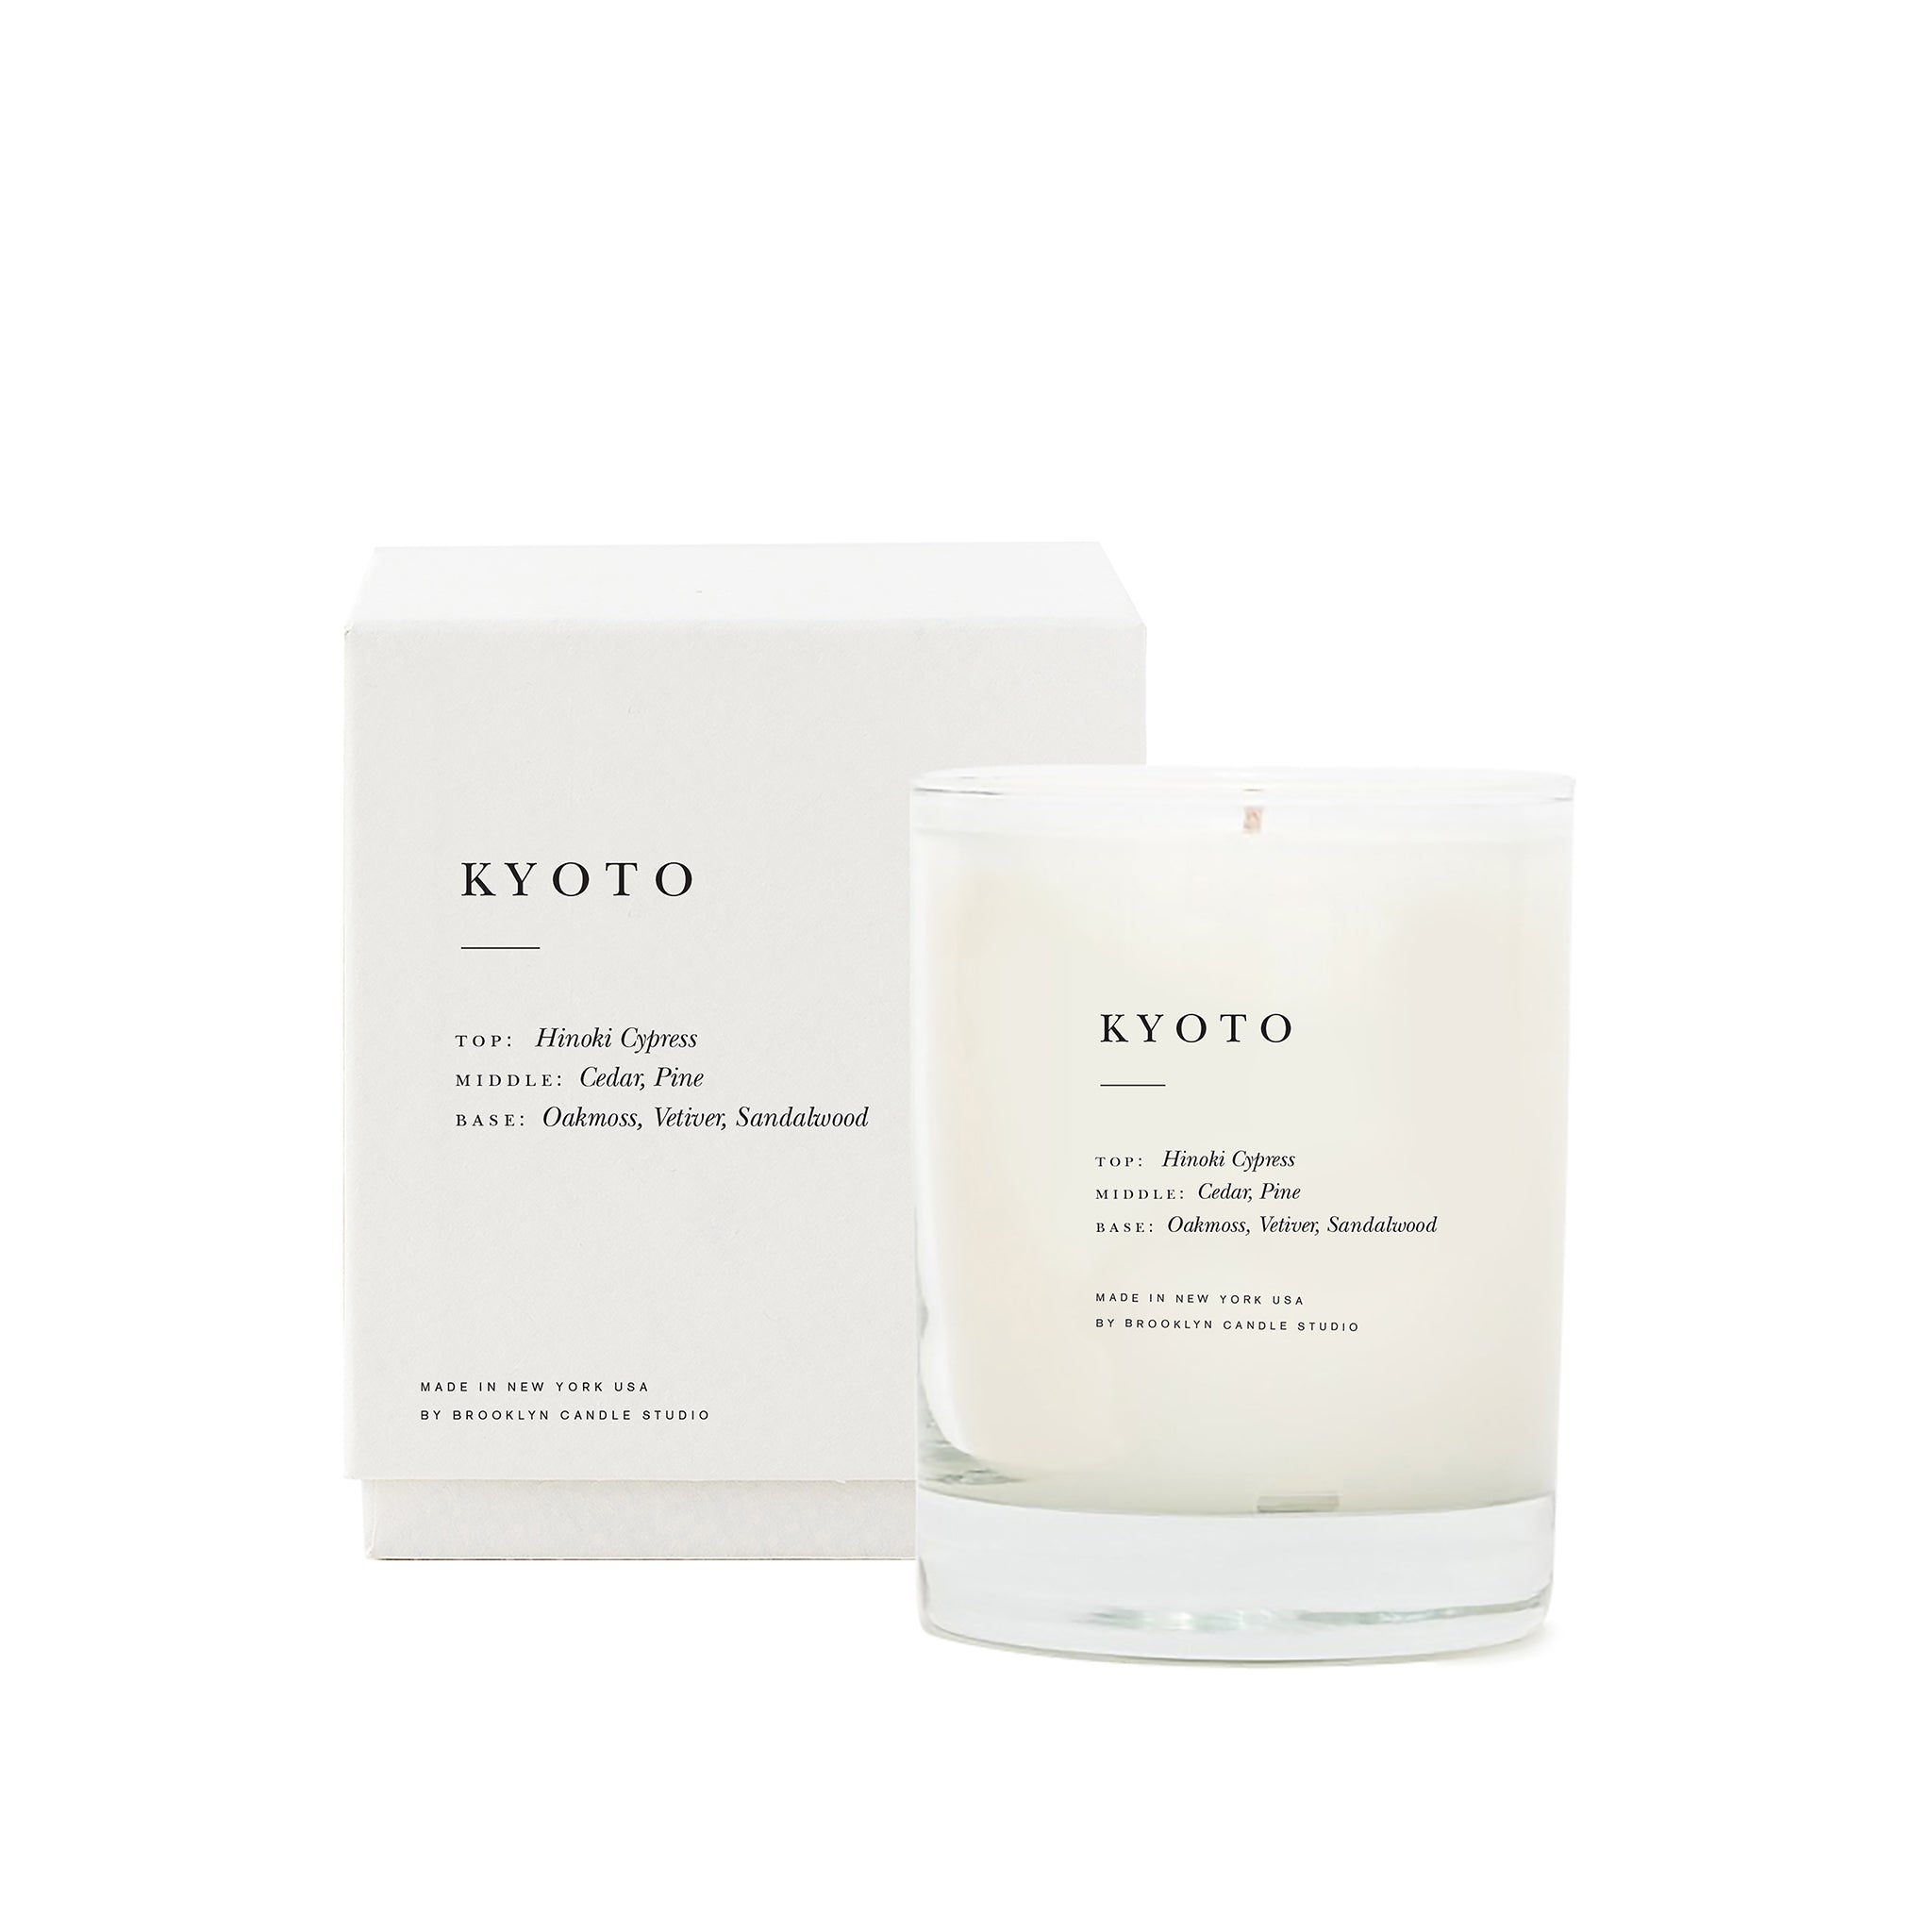 Brooklyn Candle Studio scented candle Kyoto series Escapist with packaging. A romantic homage to Kyoto in the rain, green avenues and Japanese wooden architecture. This wonderful scented candle is a meditative, calming composition of Hinoki cypress, cedar, sandalwood, vetiver and pine. Hand-poured with 100% soy wax in the small manufactory of Brooklyn Candle Studio.